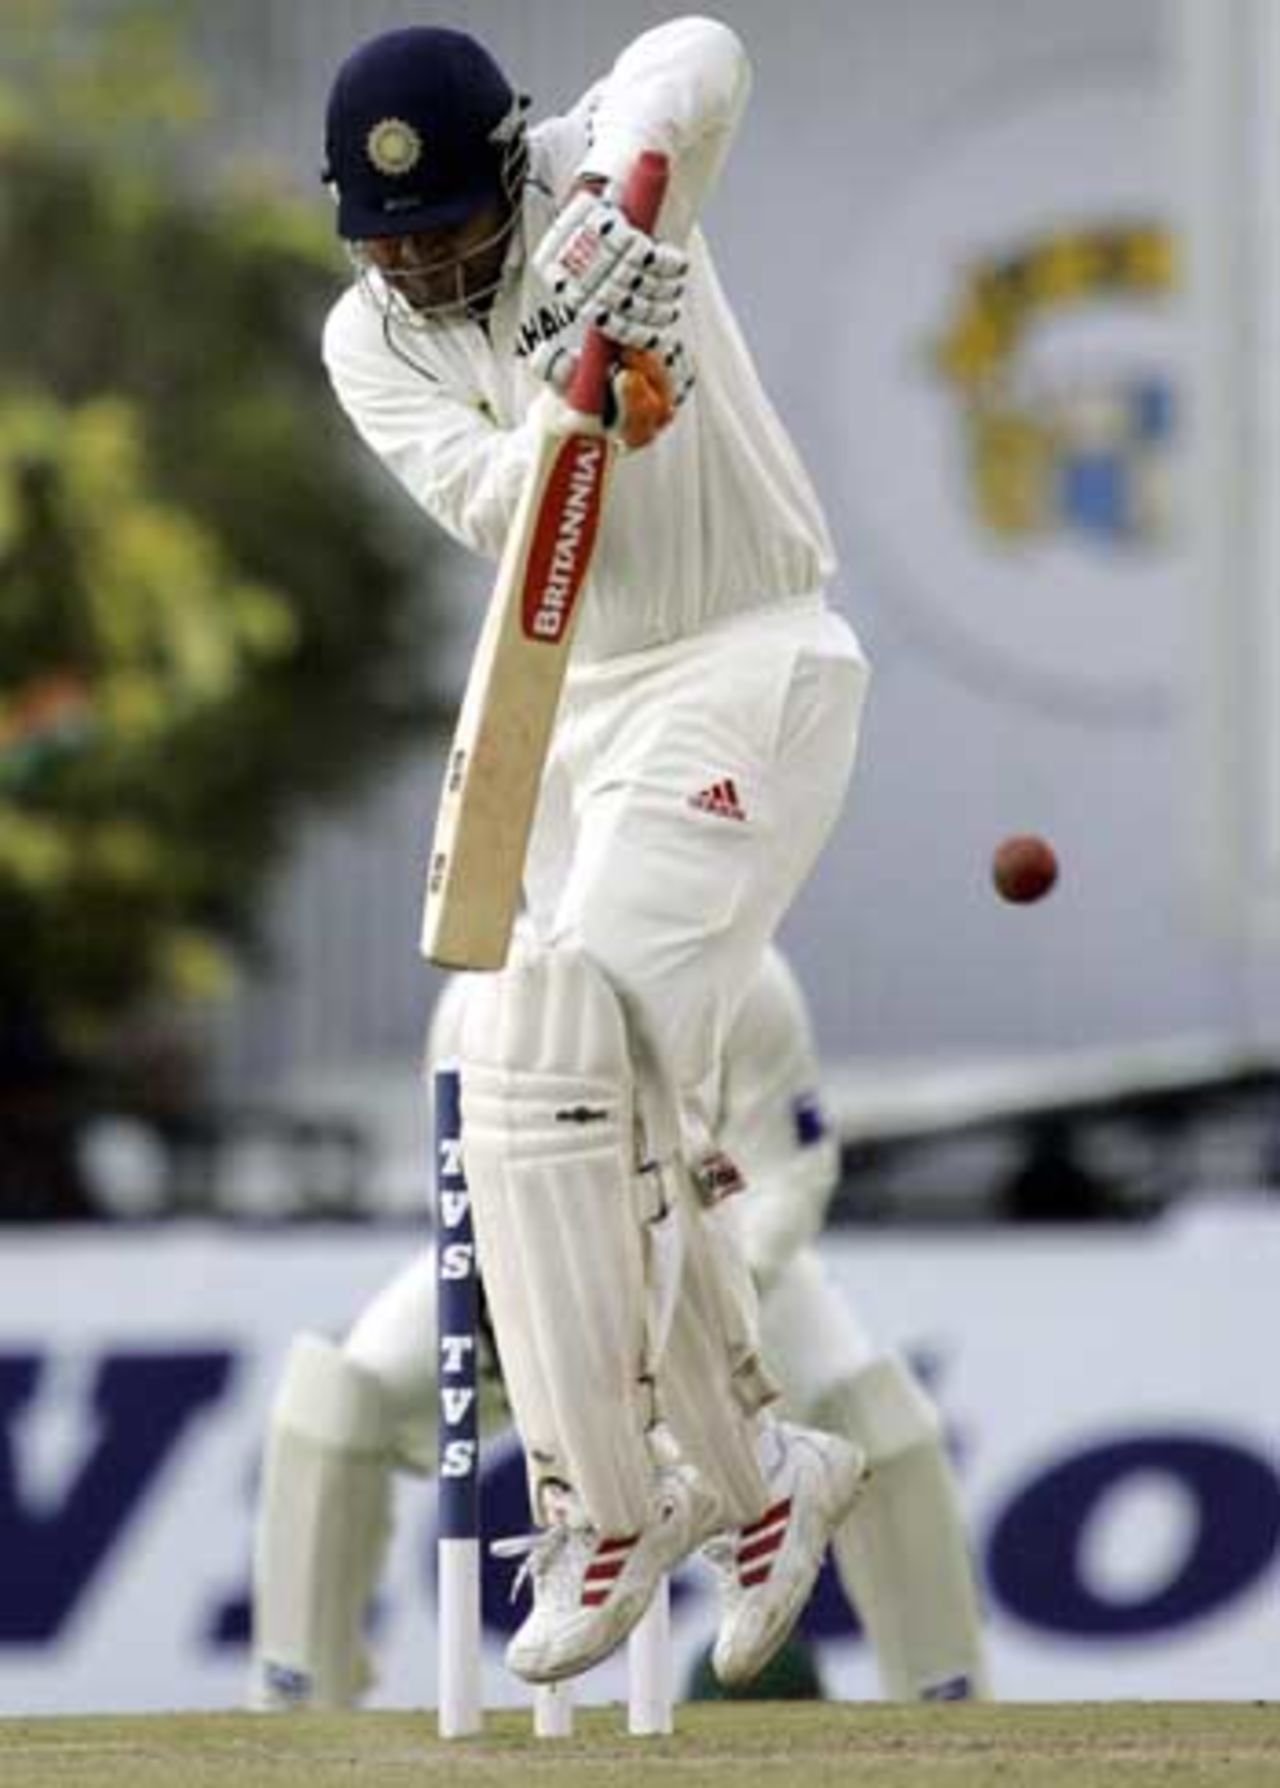 Virender Sehwag's early flicks showed the kind of mood he was in after the rain delay, India v Pakistan, 1st Test, Mohali, March 9, 2005